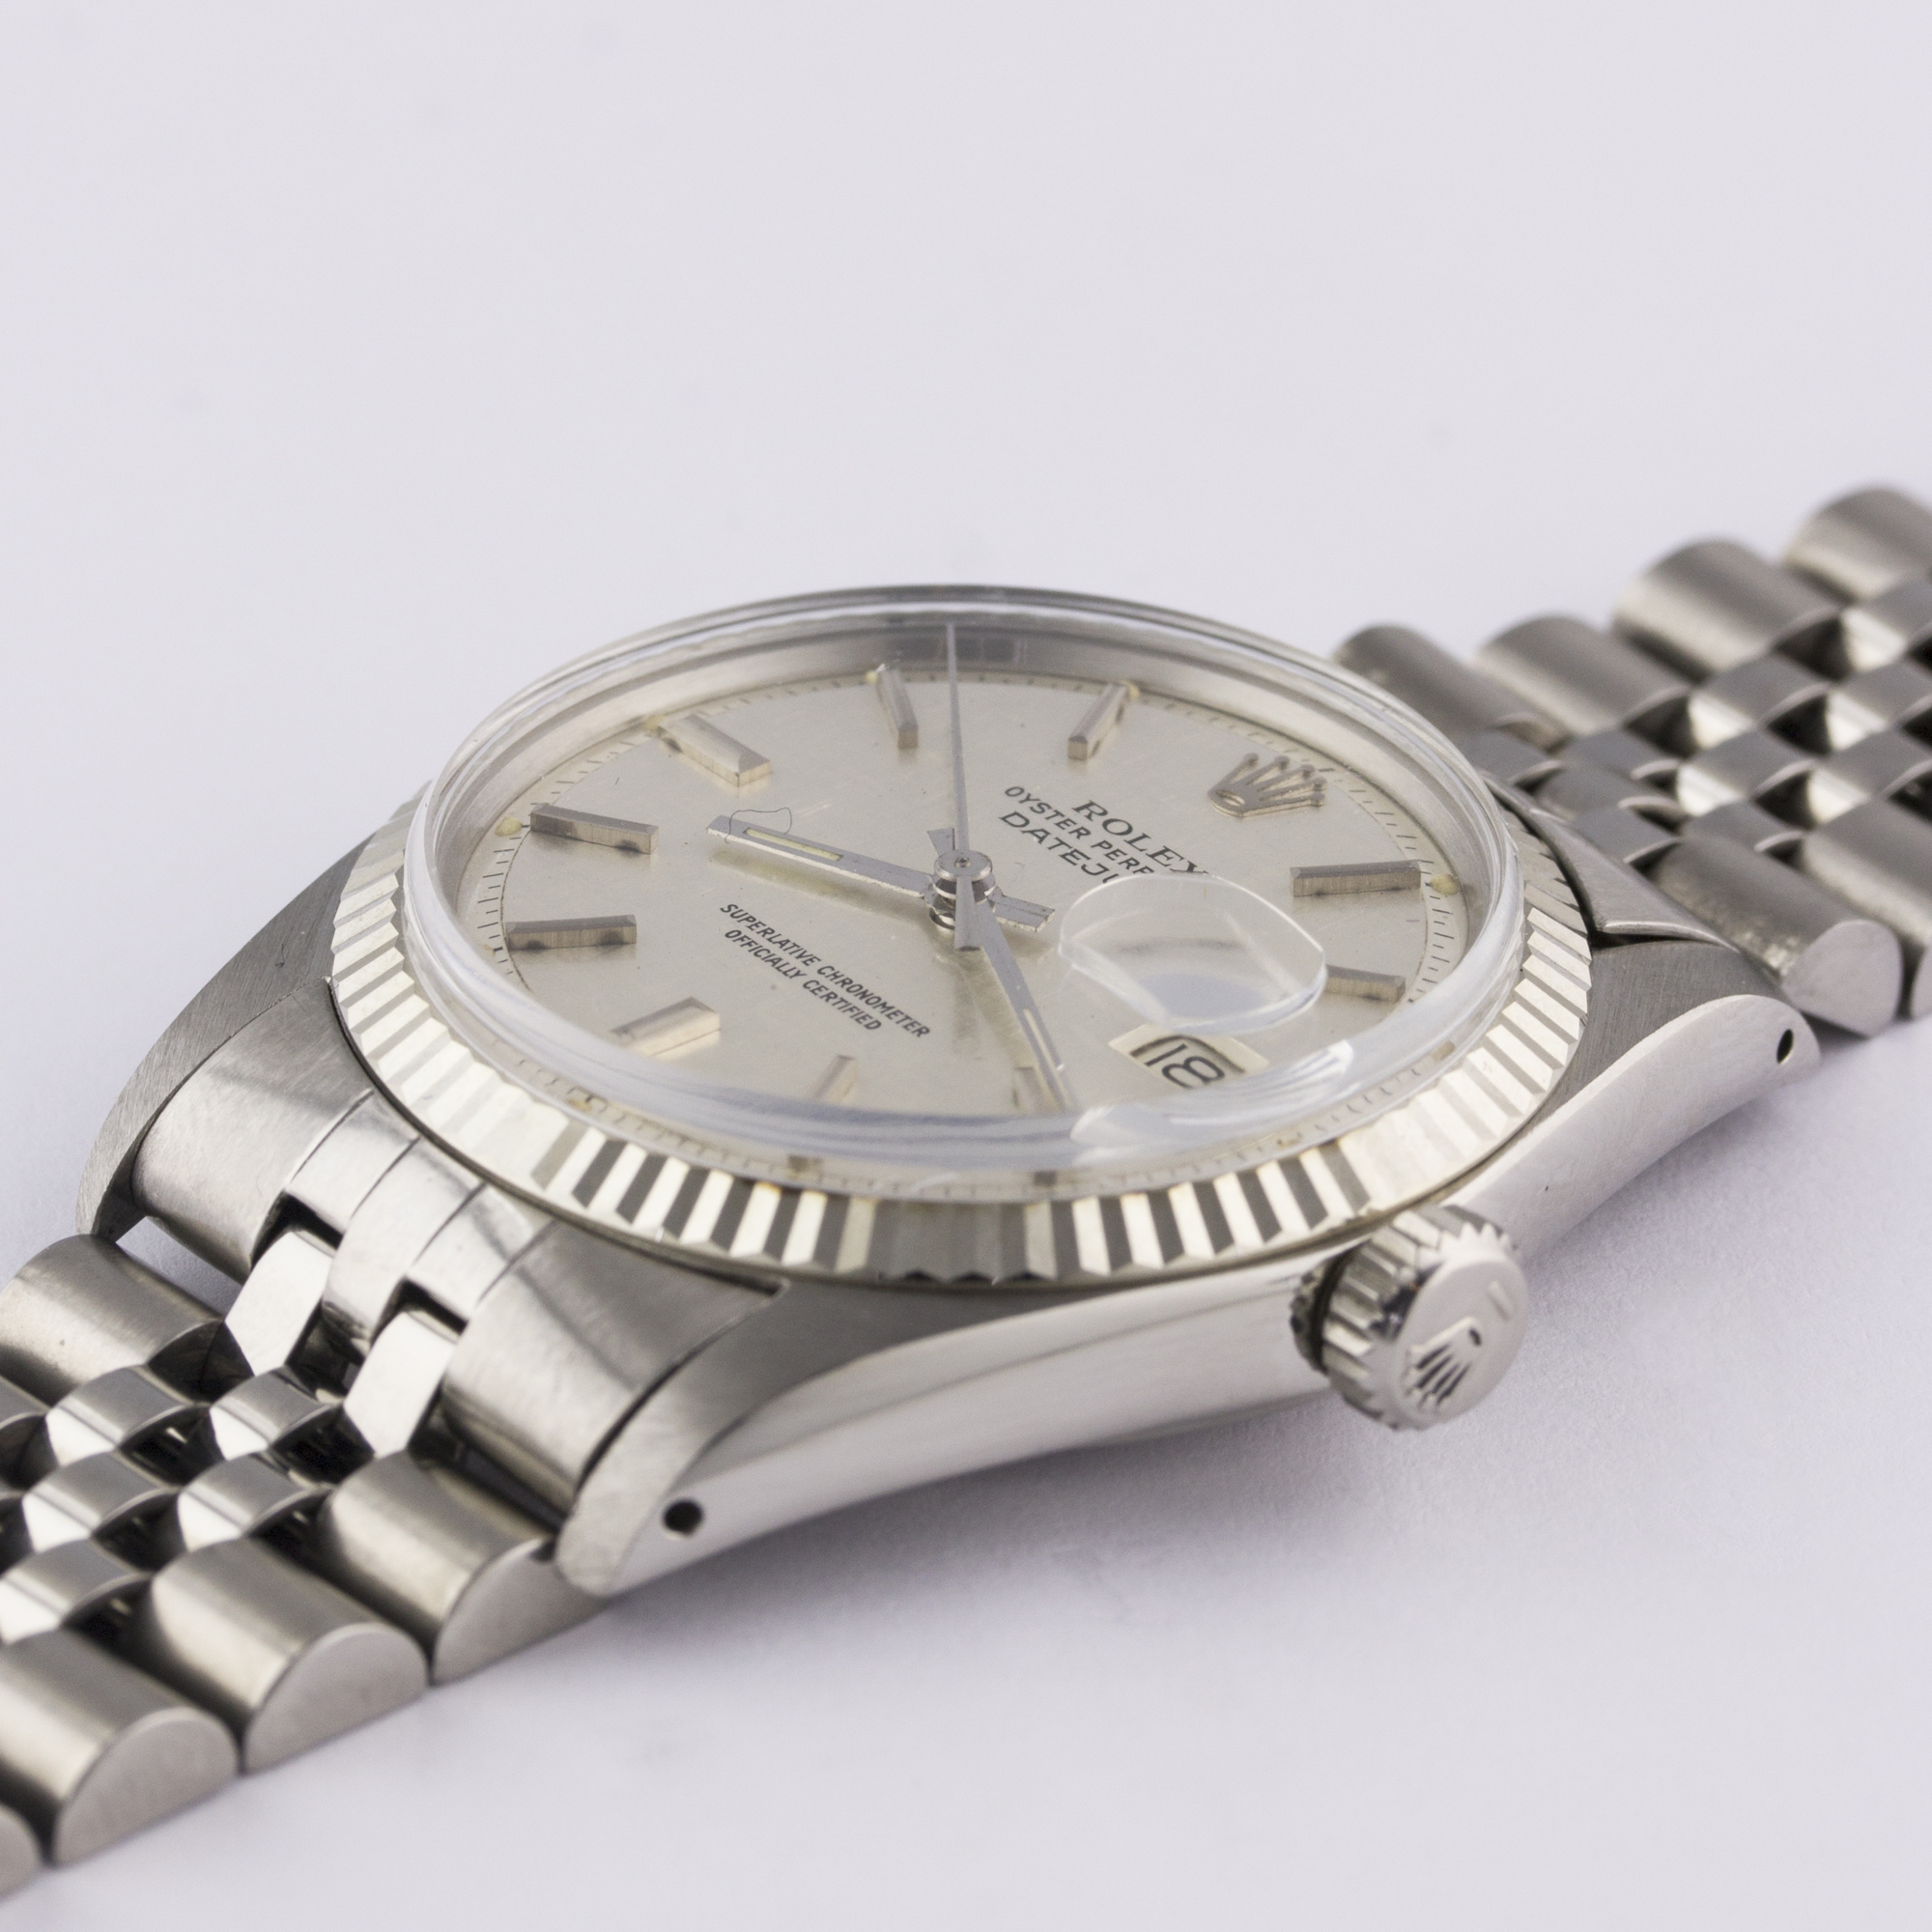 A GENTLEMAN'S STEEL & WHITE GOLD ROLEX OYSTER PERPETUAL DATEJUST BRACELET WATCH CIRCA 1977, REF. - Image 3 of 9